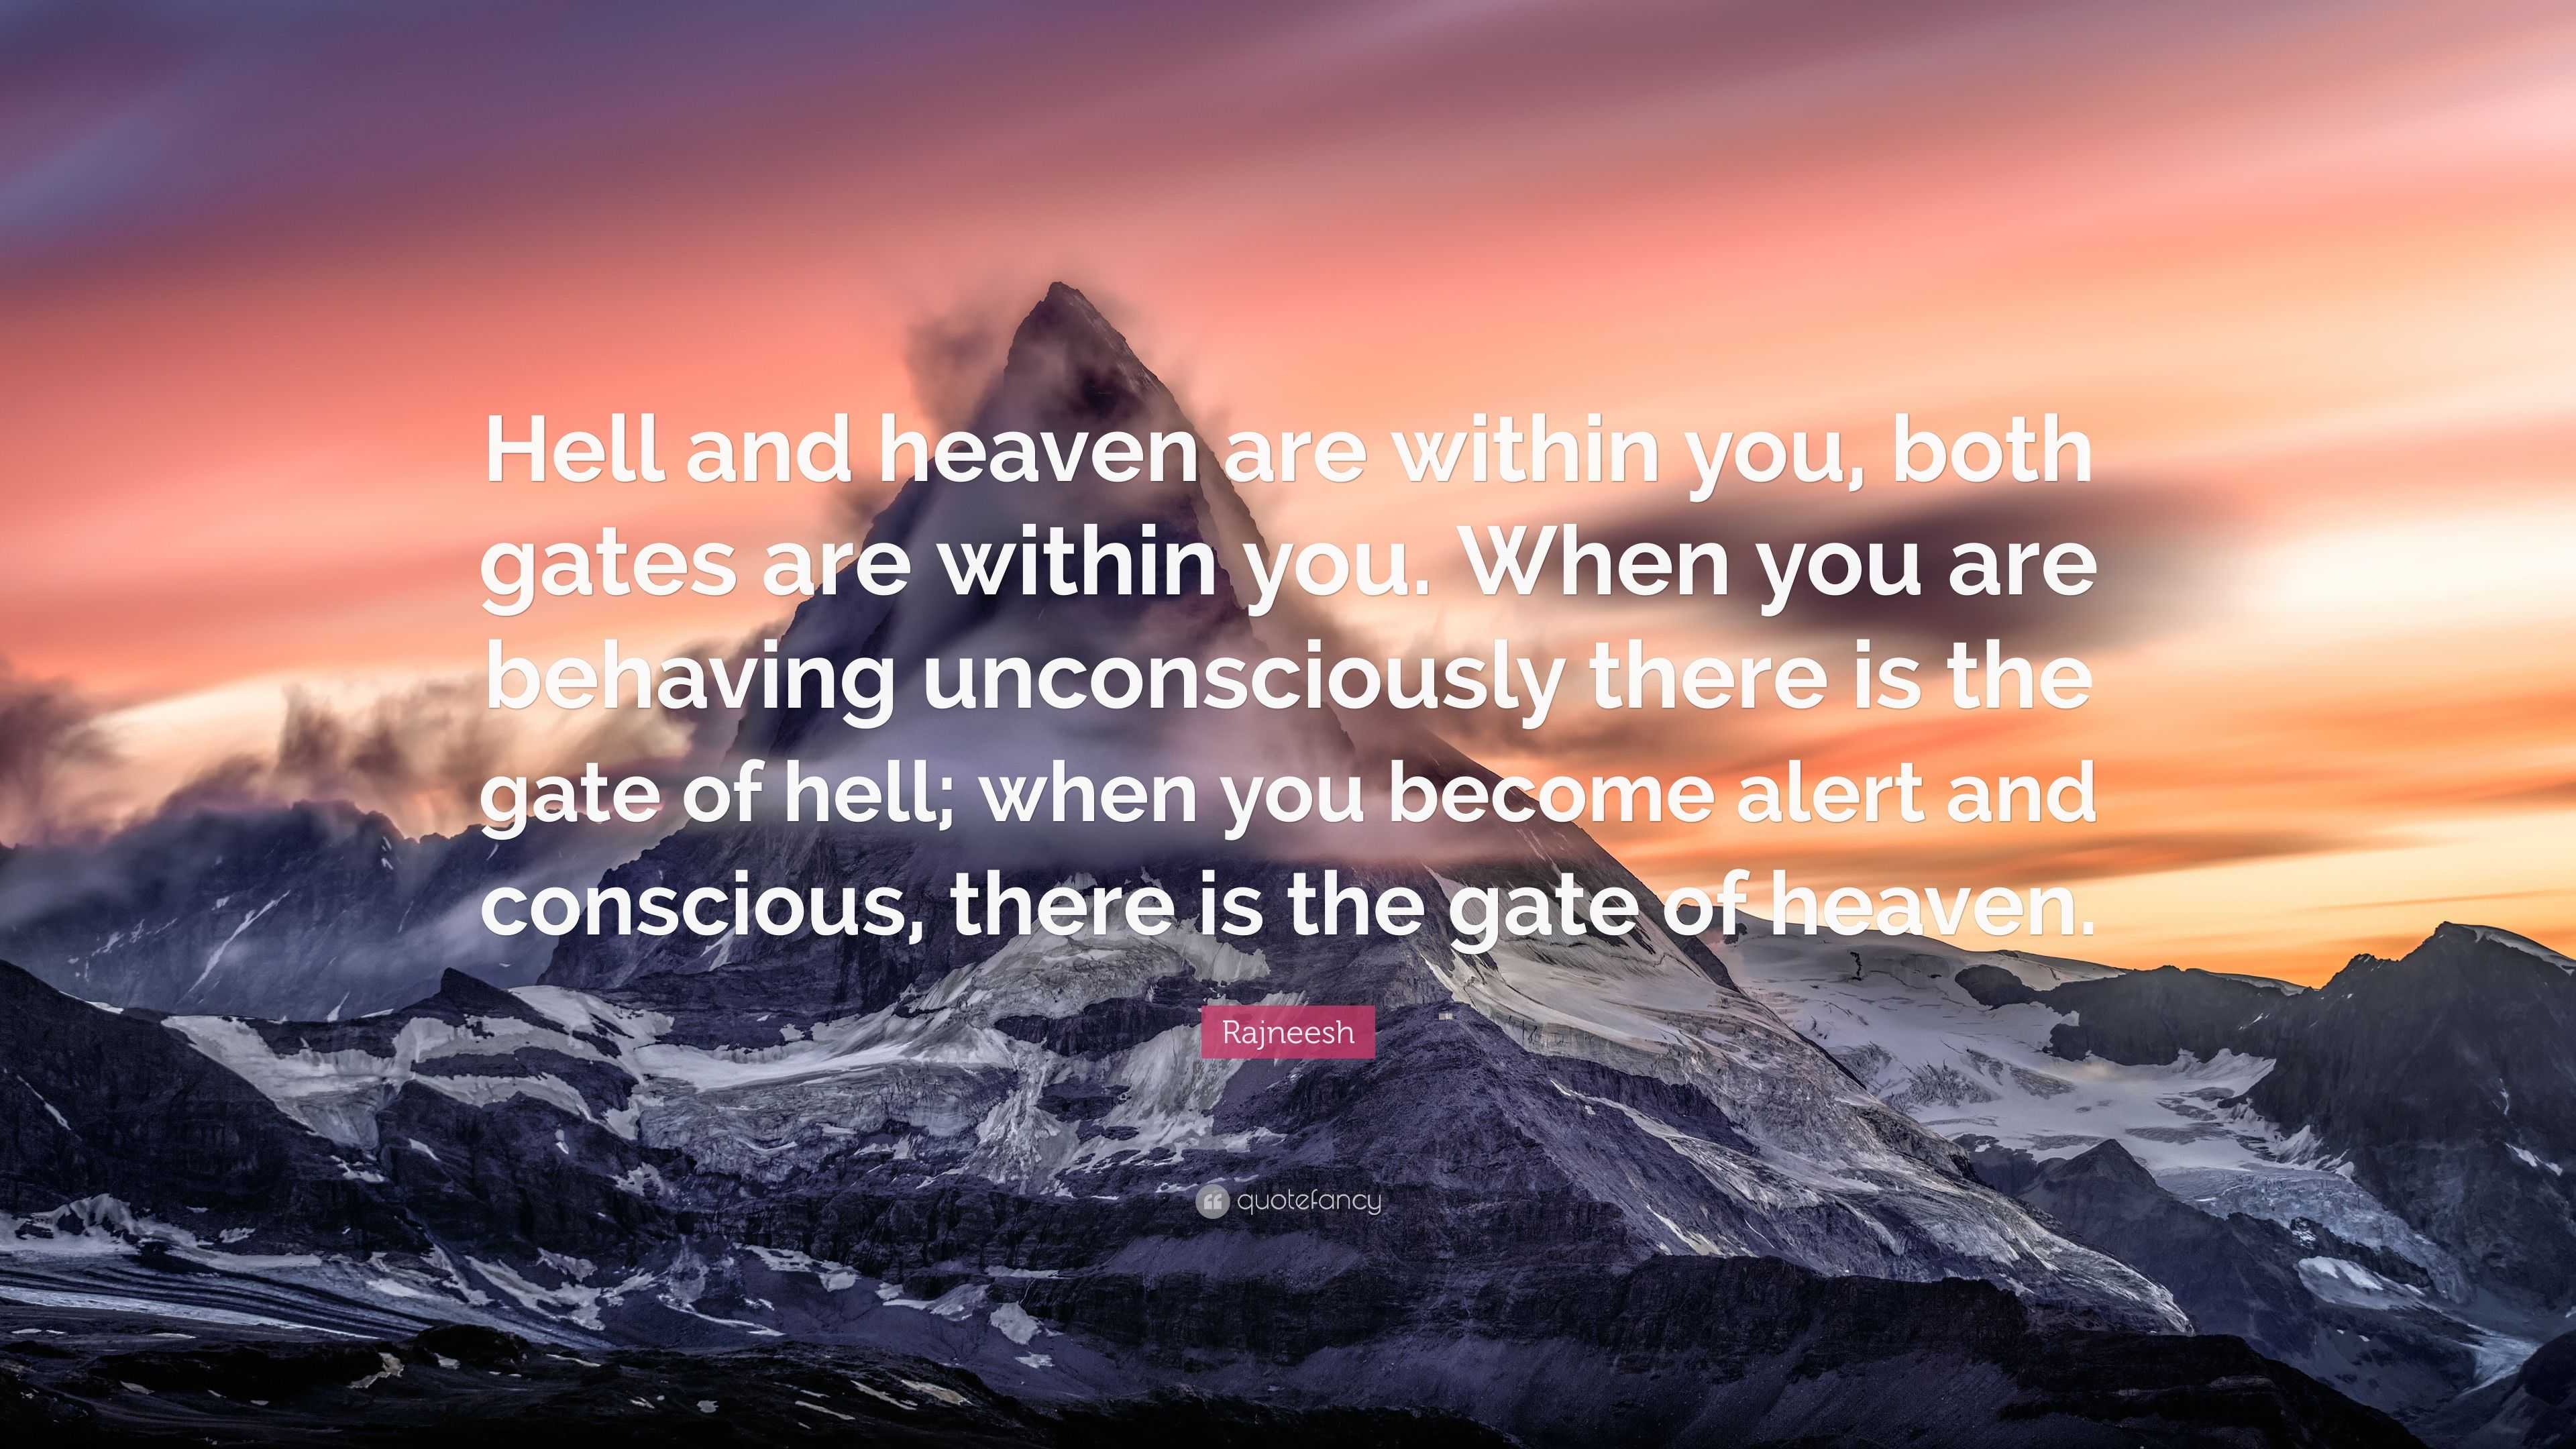 Rajneesh Quote Hell And Heaven Are Within You Both Gates Are Within You When You Are Behaving Unconsciously There Is The Gate Of Hell 9 Wallpapers Quotefancy